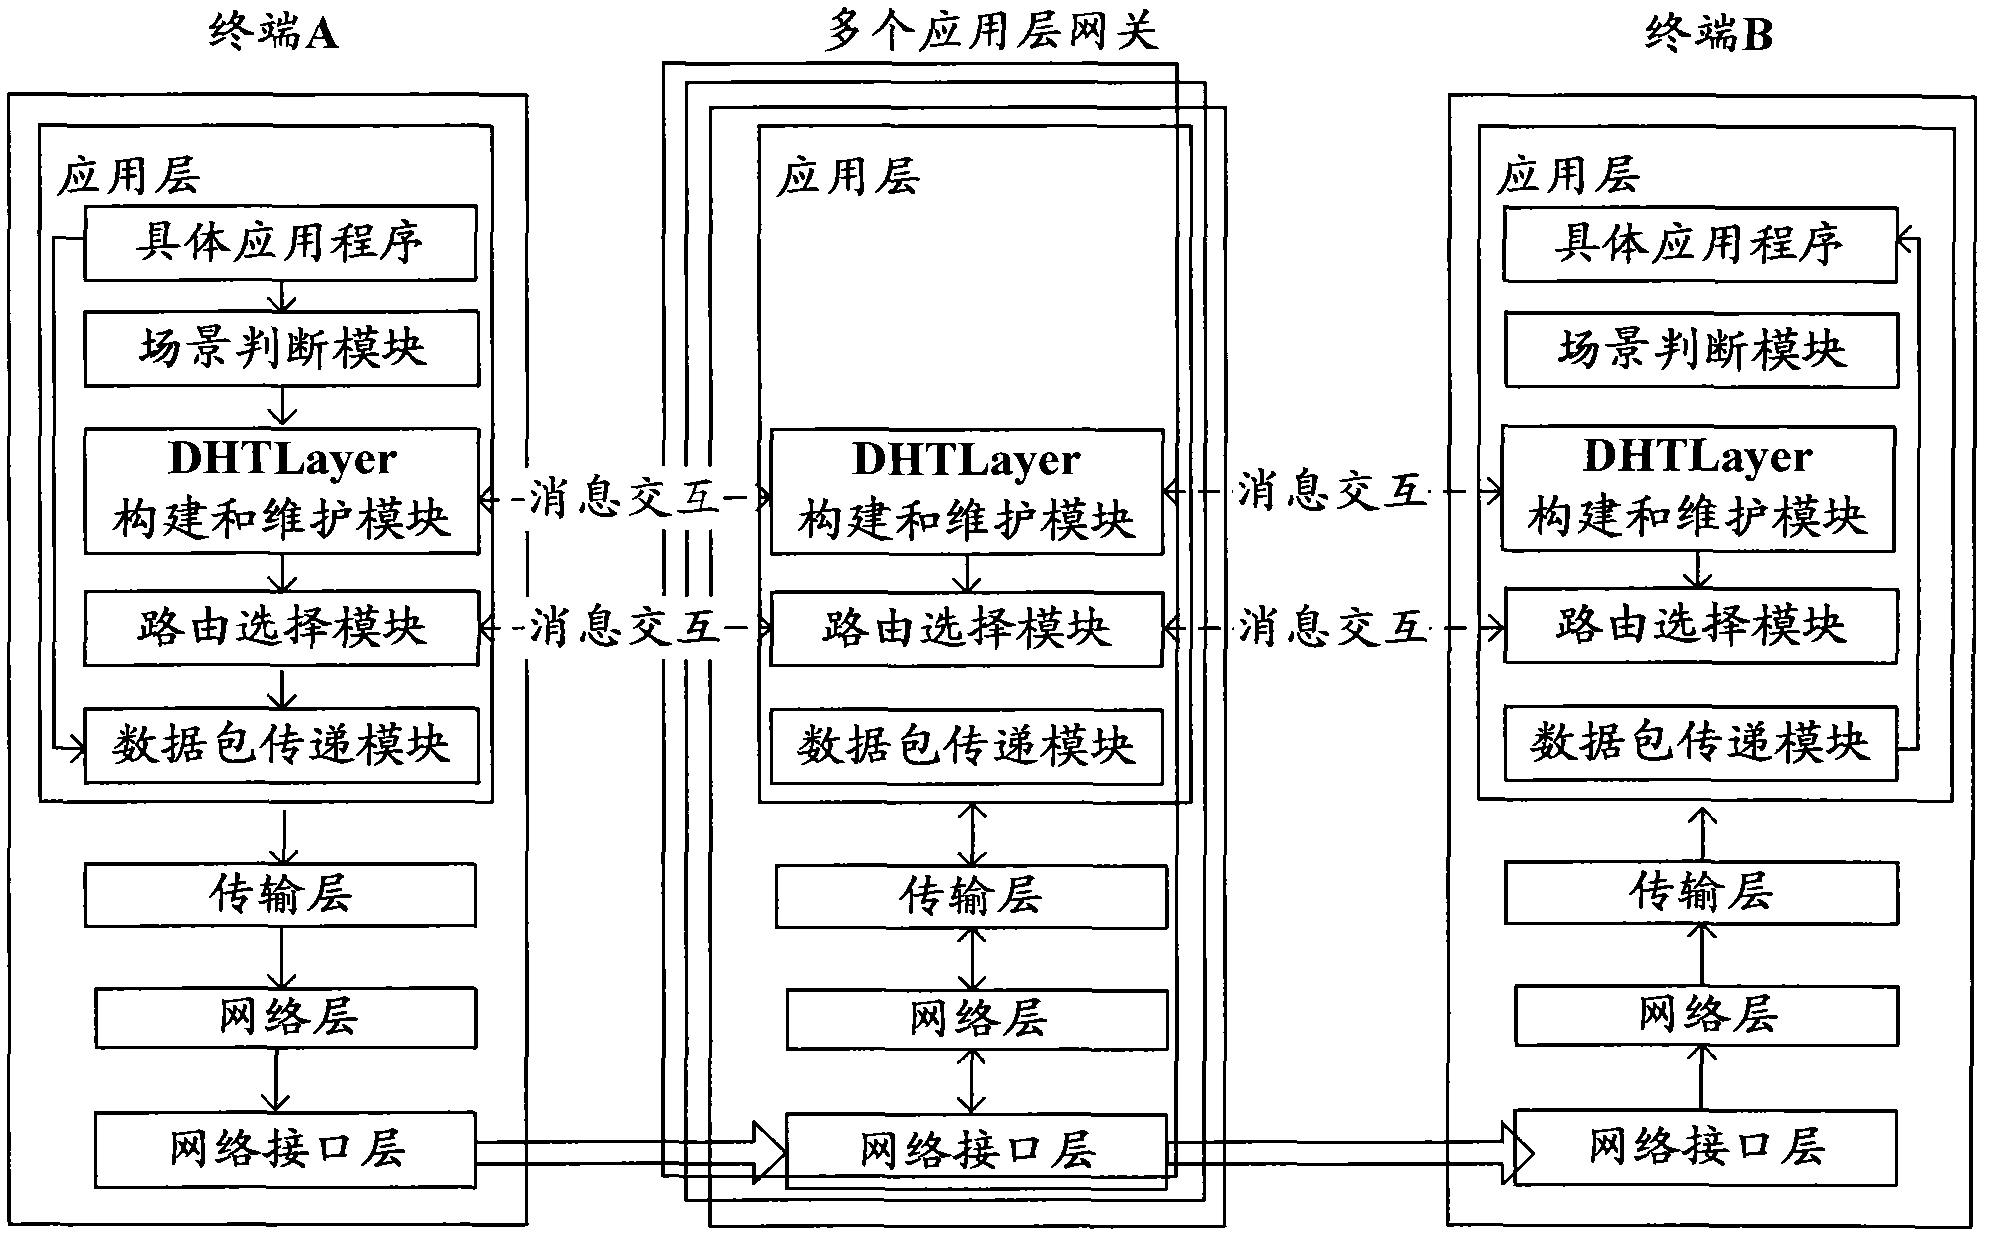 System and method for interworking between IPv4 (internet protocol version 4) and IPv6 (internet protocol version 6) based on DHT (distributed hash table)